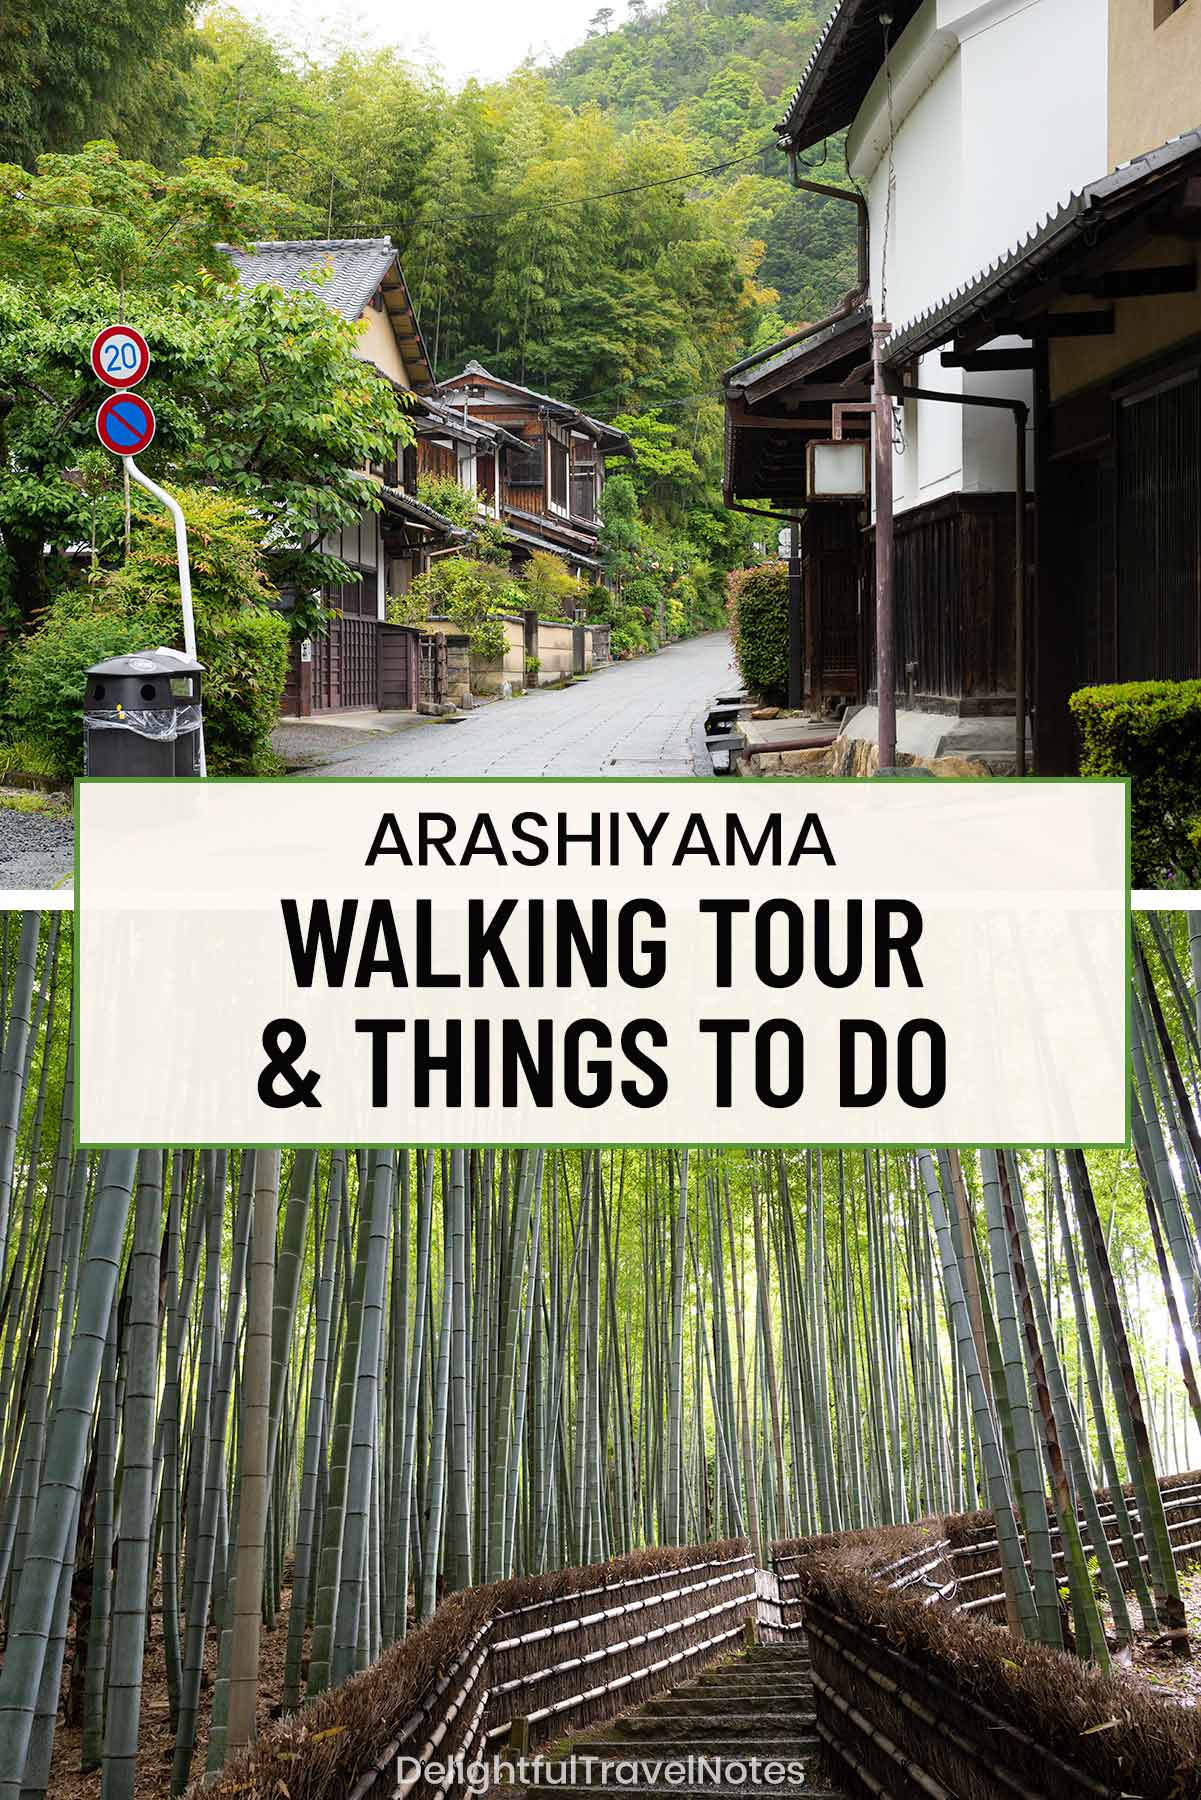 collage of sceneries on the less crowded self-guided walking tour in Arashiyama, Kyoto.